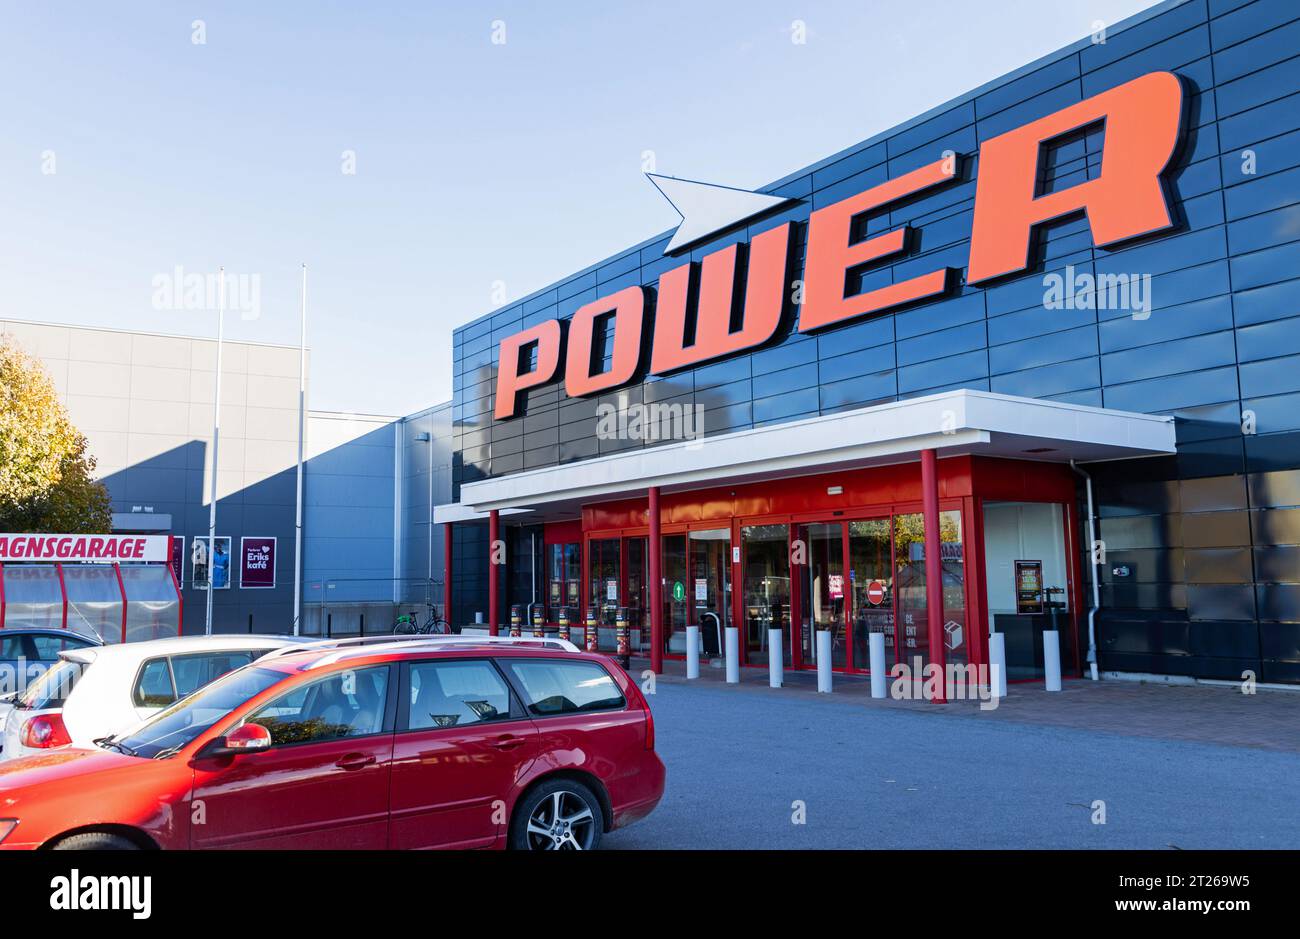 Signs and symbols, Power department store. Power is a retail chain for home electronics owned by Norwegian Expert ASA. The company has 29 department stores located in Sweden. These were taken over by Power when Media Markt chose to leave Sweden. Stock Photo